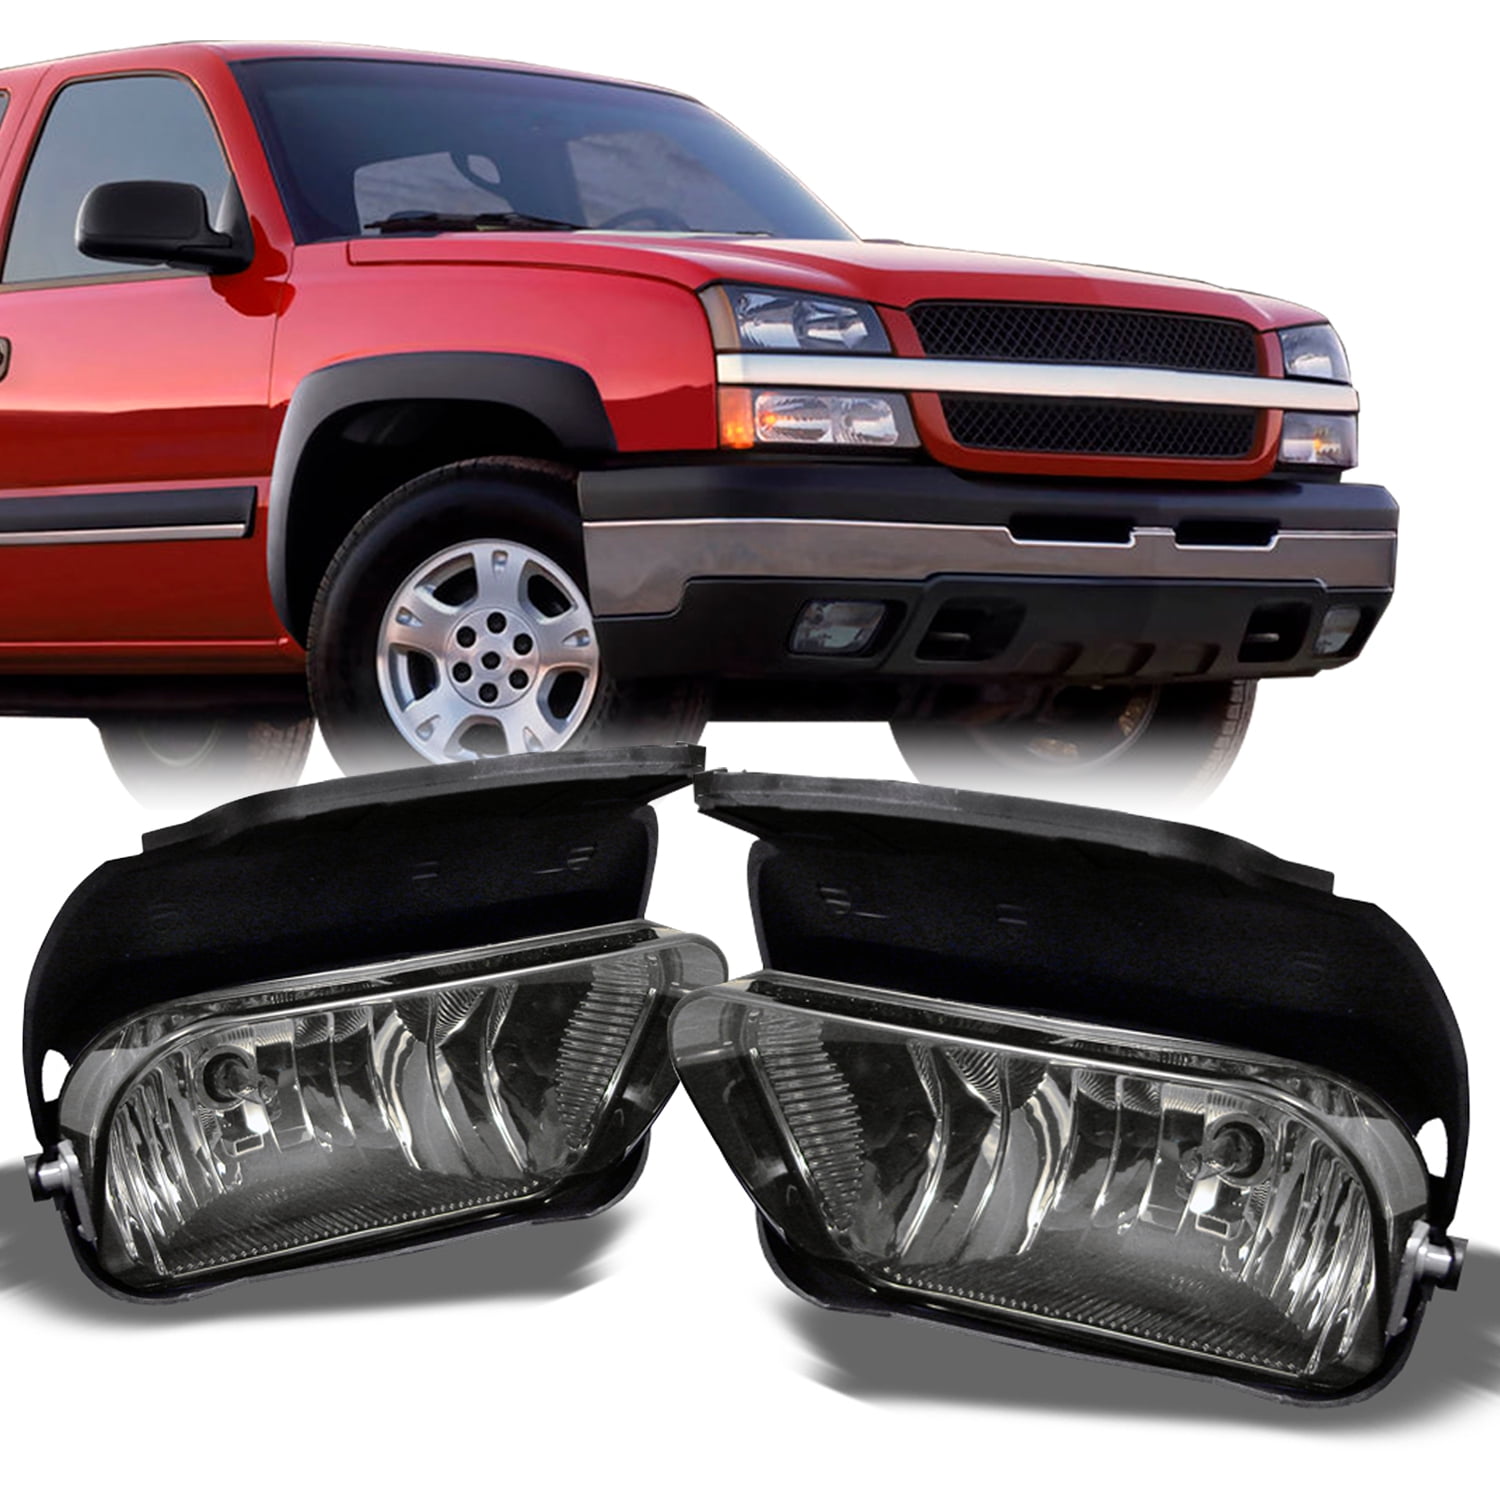 Smoked Left &Right Fog Lights Lamps W/ Bracket Fit For 02-06 Avalanche 1500 2500